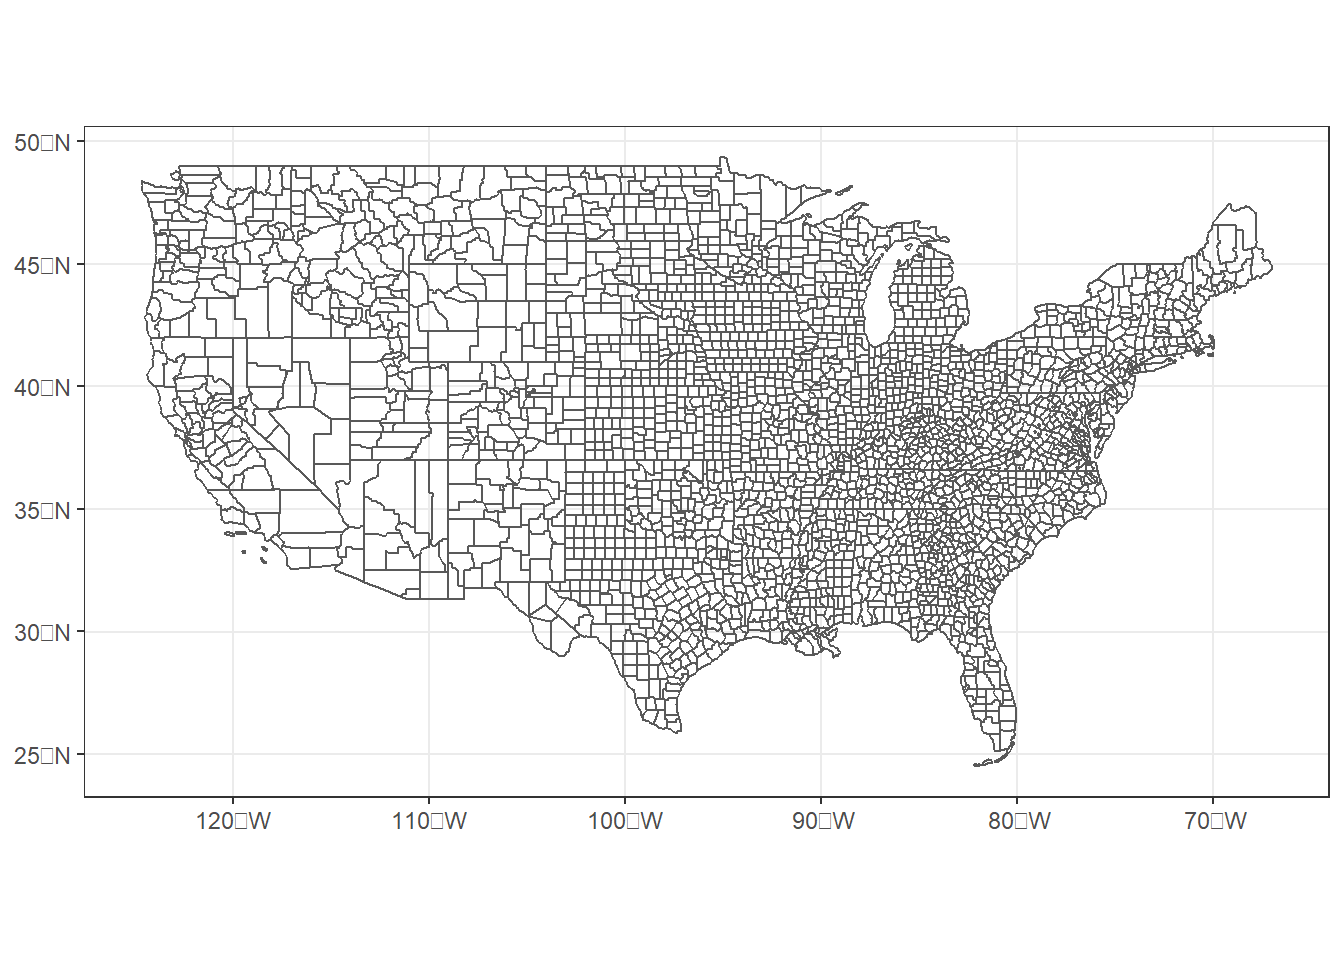 U.S. counties mapped in a geographic coordinate system.